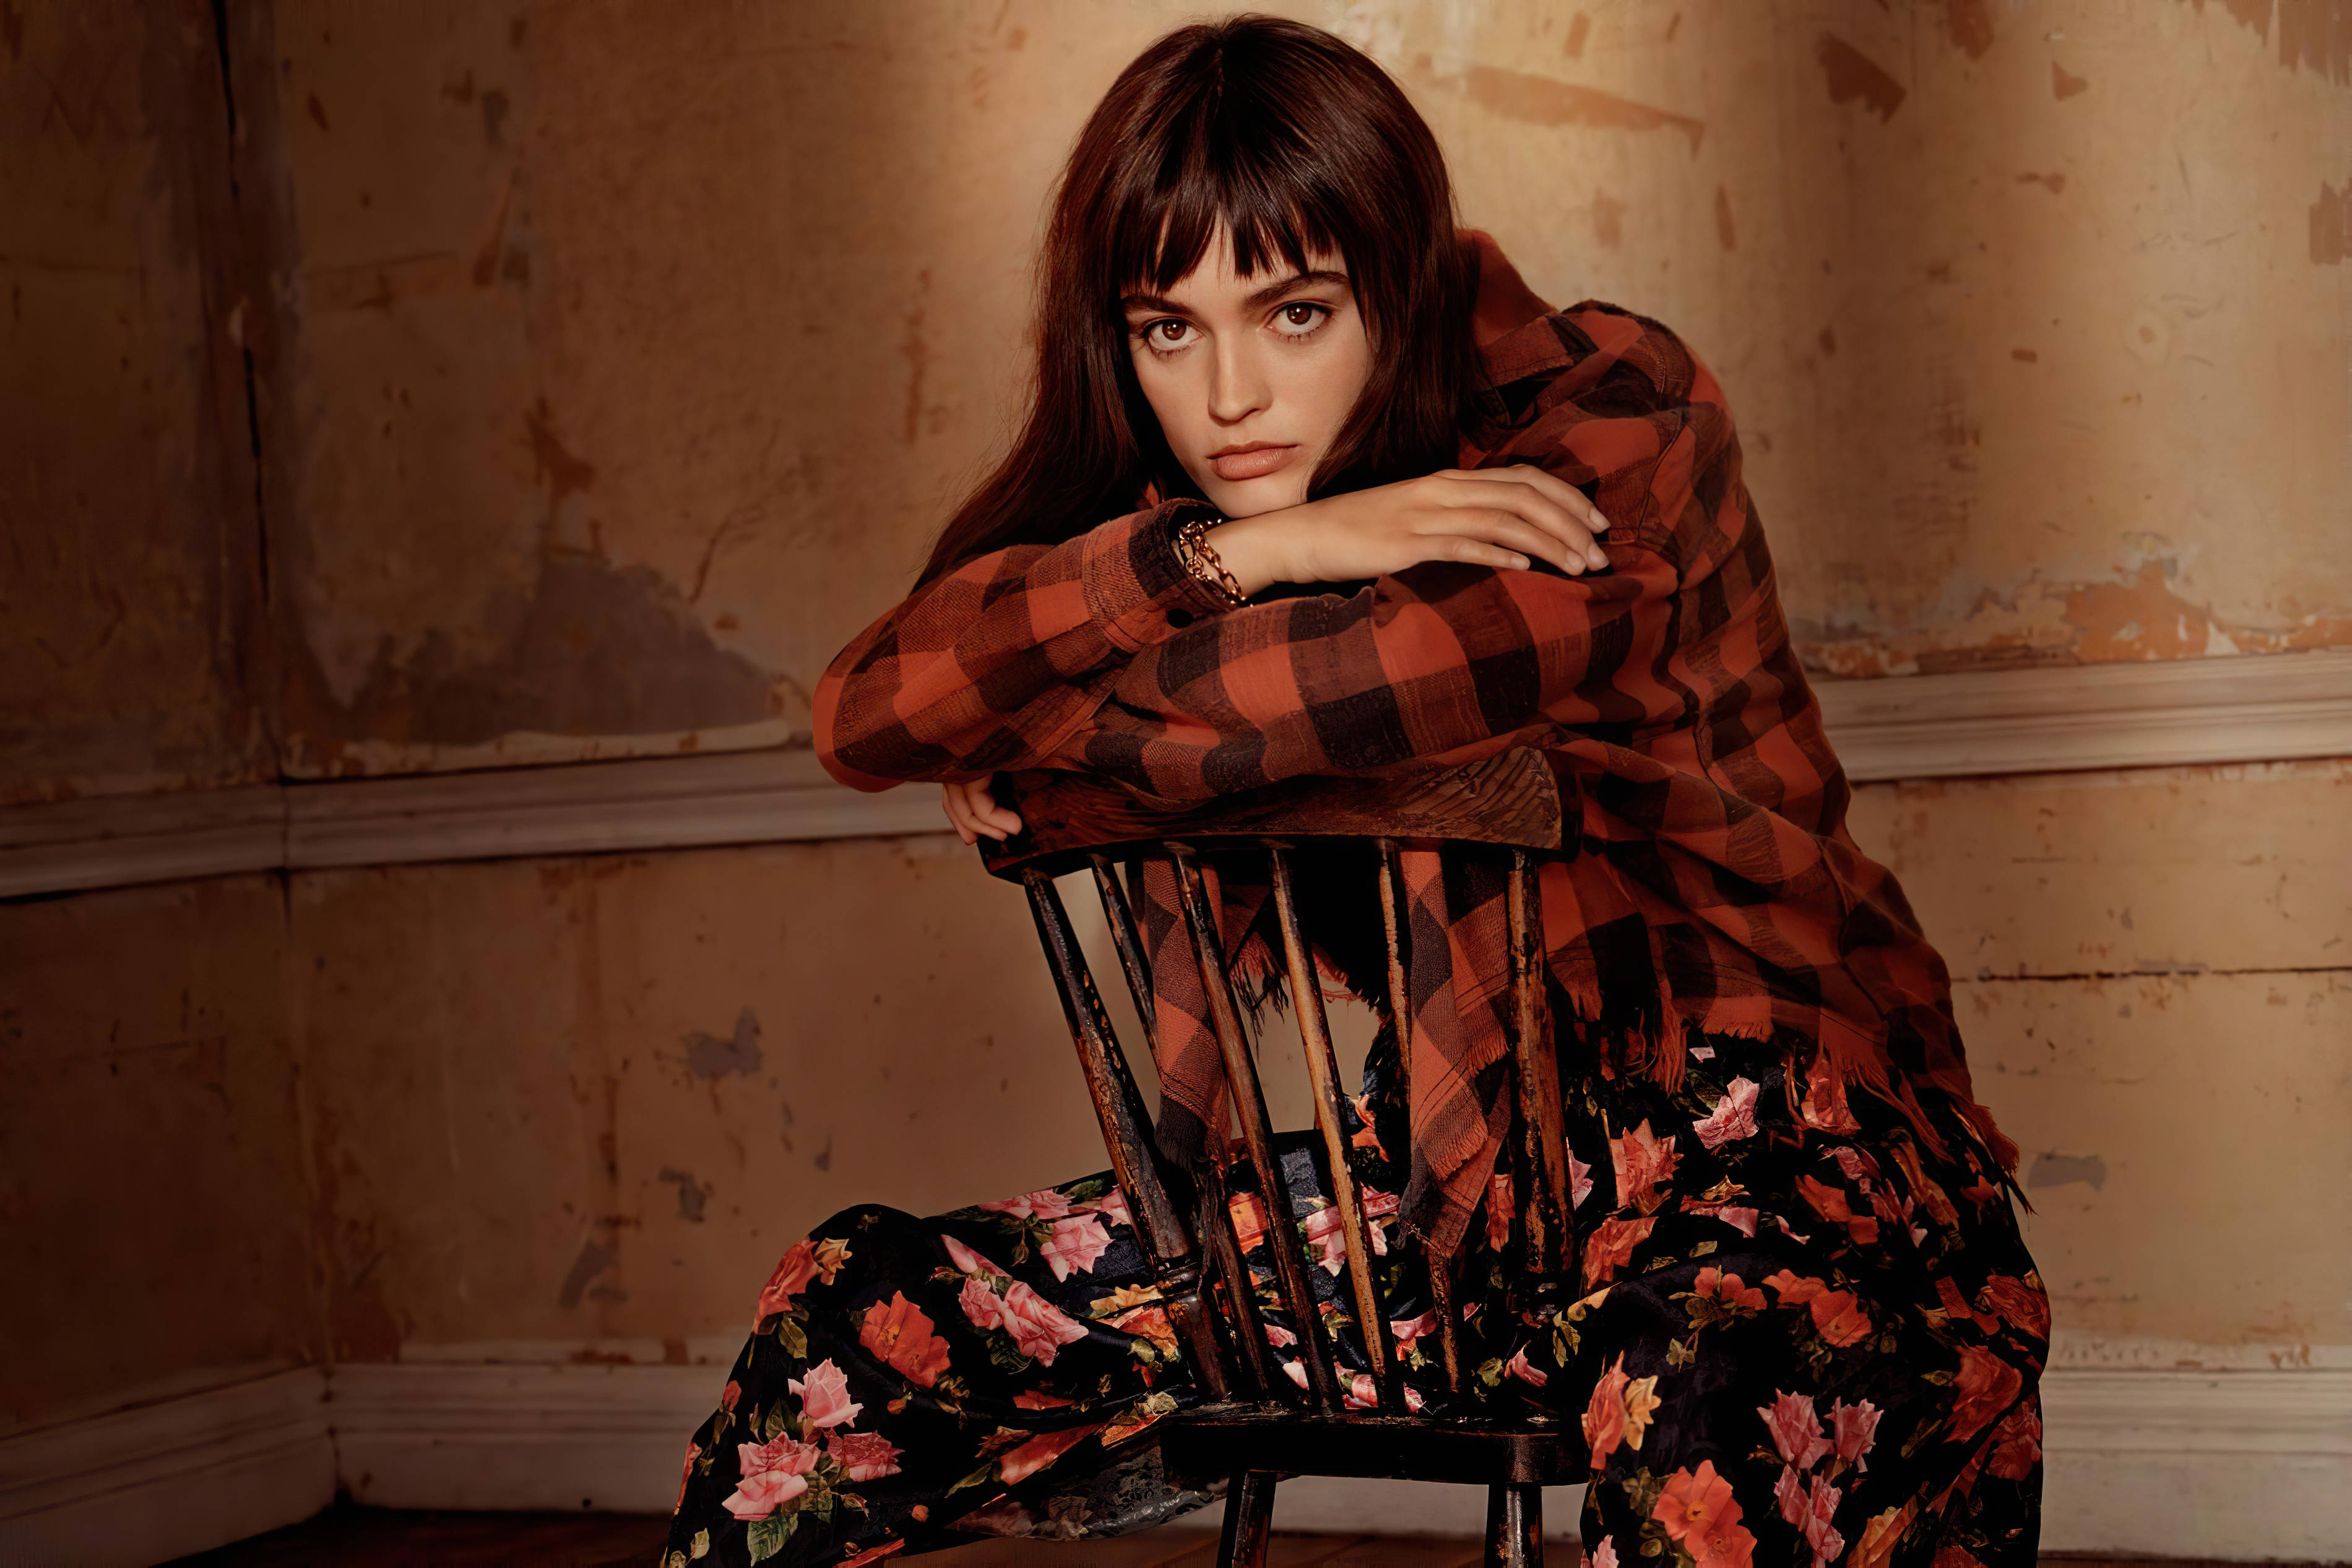 Editorial Portrait Of The Actress, Emma Mackey, With Bangs While Sitting Backwards On A Chair In Patterned Clothing